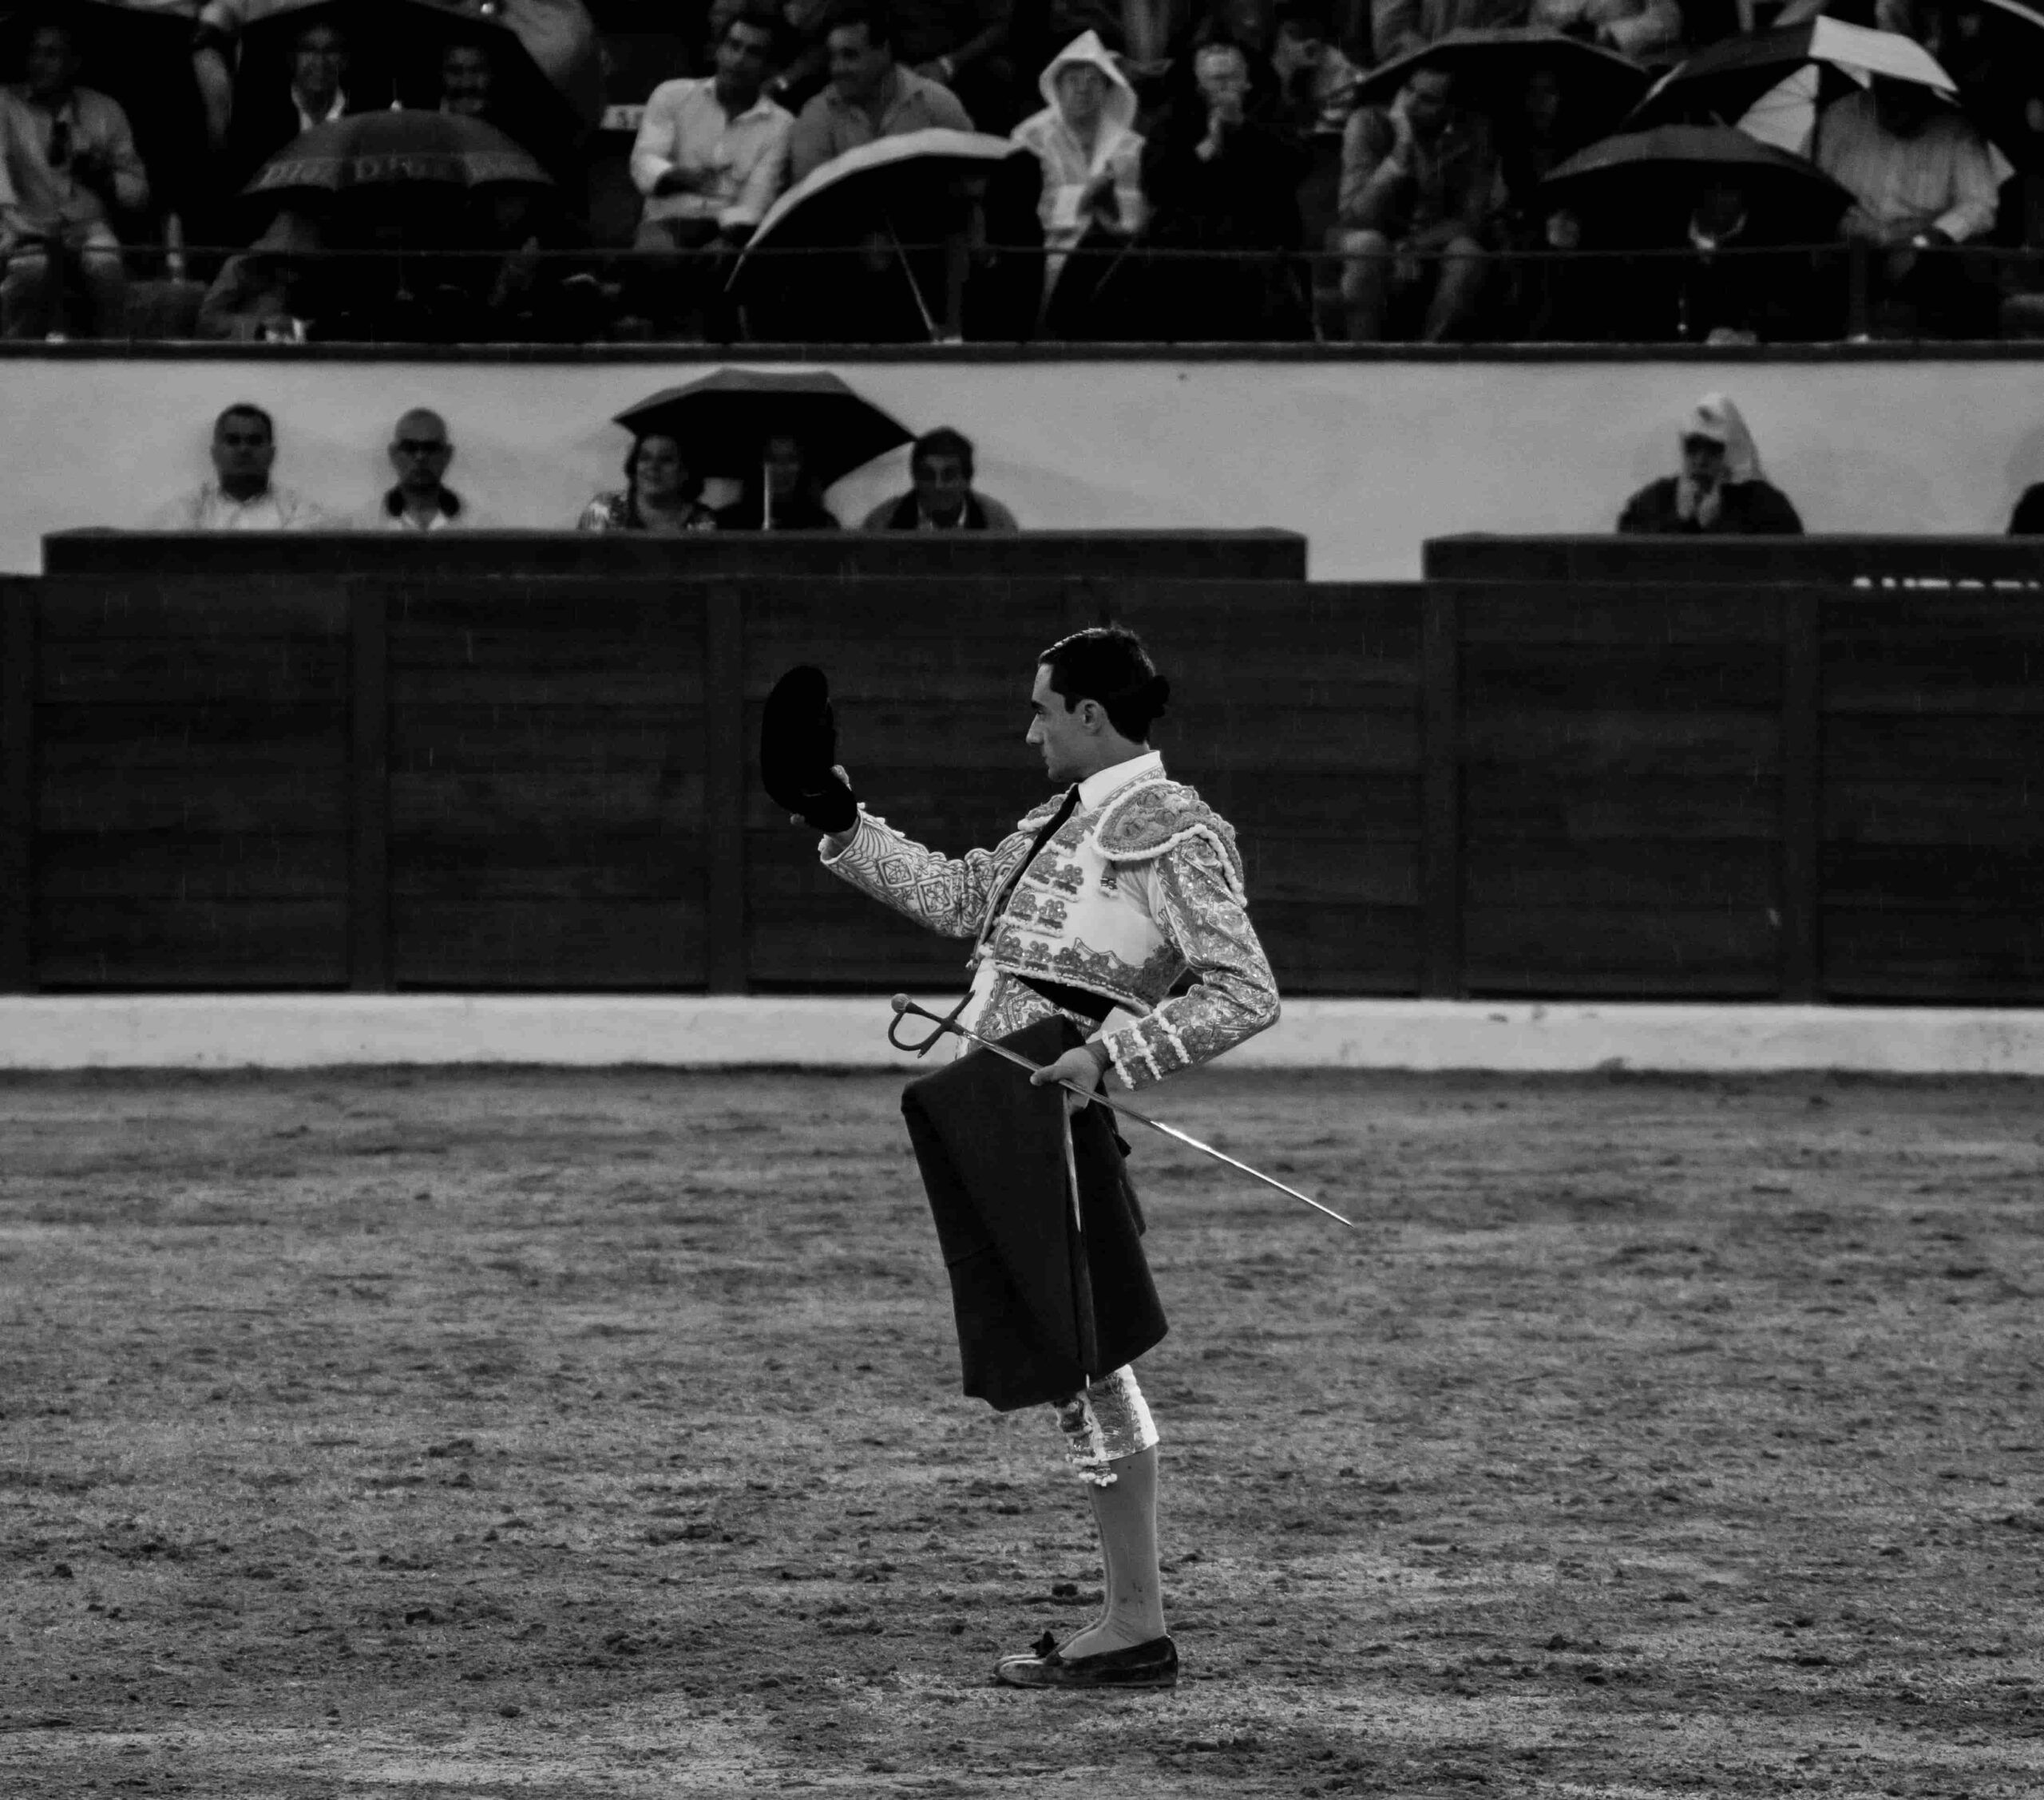 The Art and Controversy of Bullfighting: Tradition, Spectacle, and Ethical Concerns